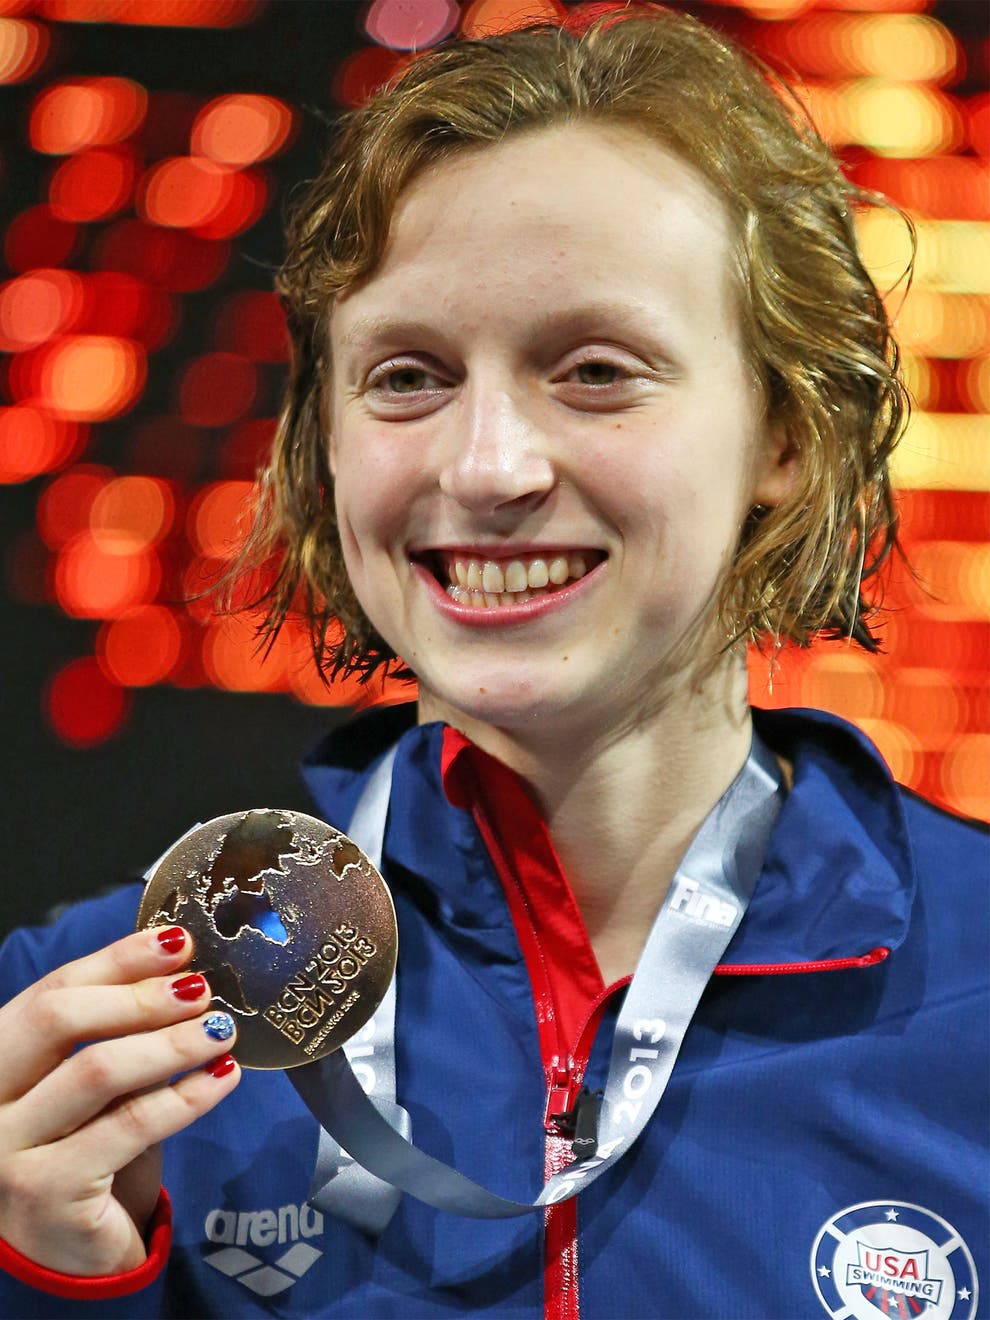 Swimming Katie Ledecky shatters 1500m freestyle world record The